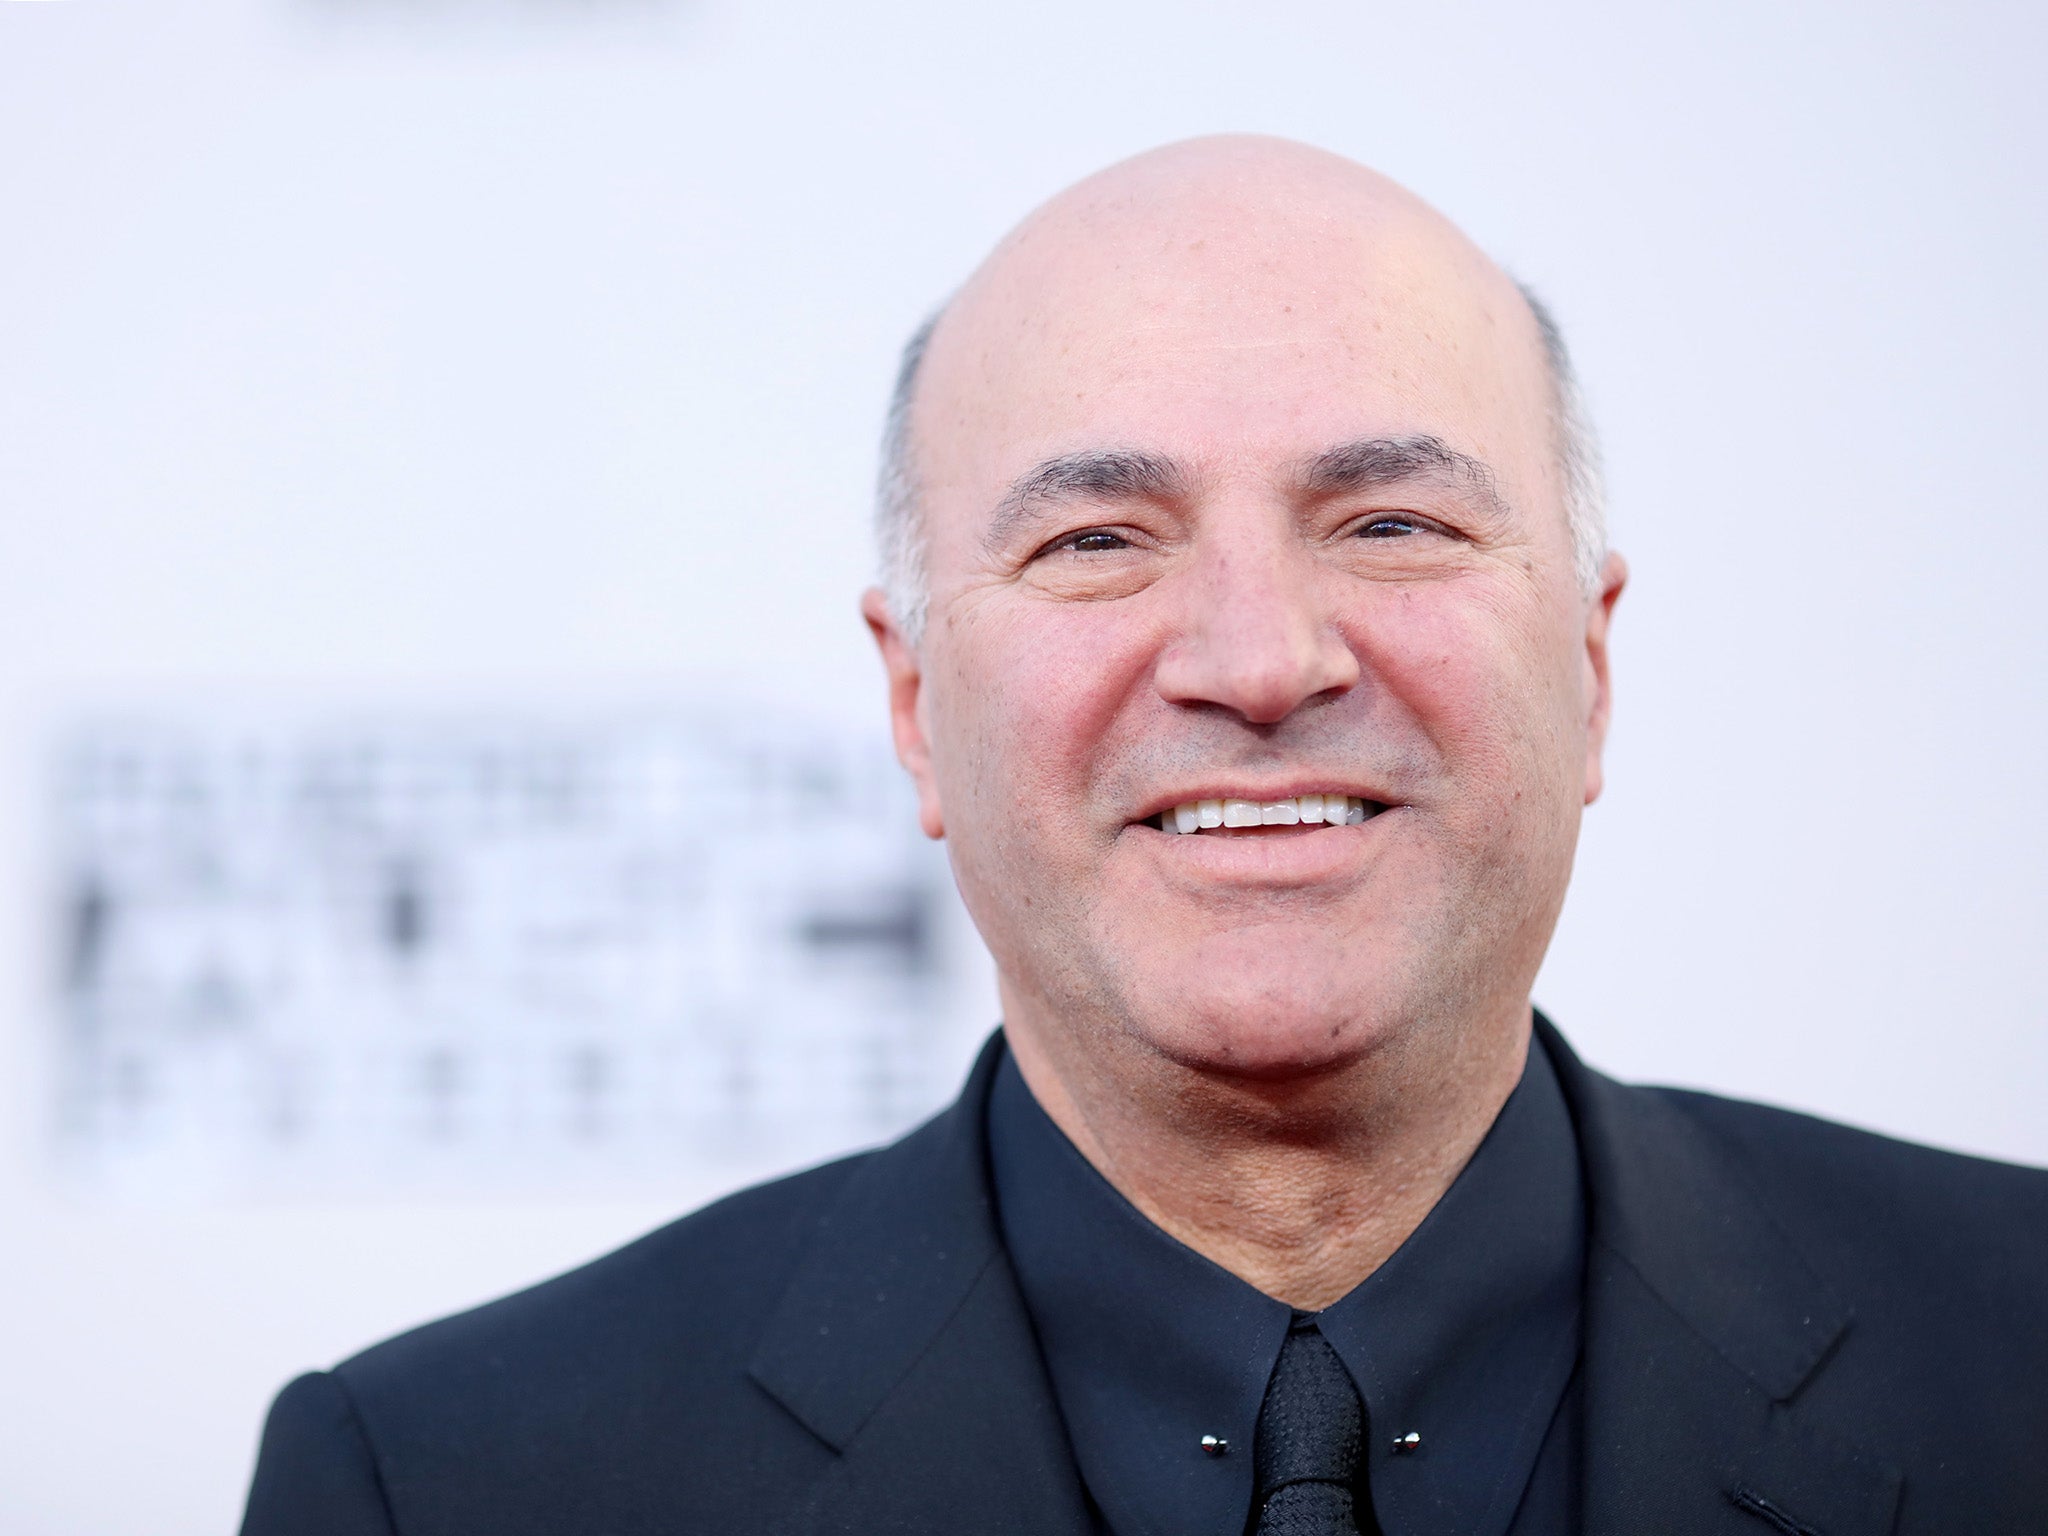 Kevin O’Leary has been an investor on reality television shows ‘Dragons’ Den’ and ‘Shark Tank’